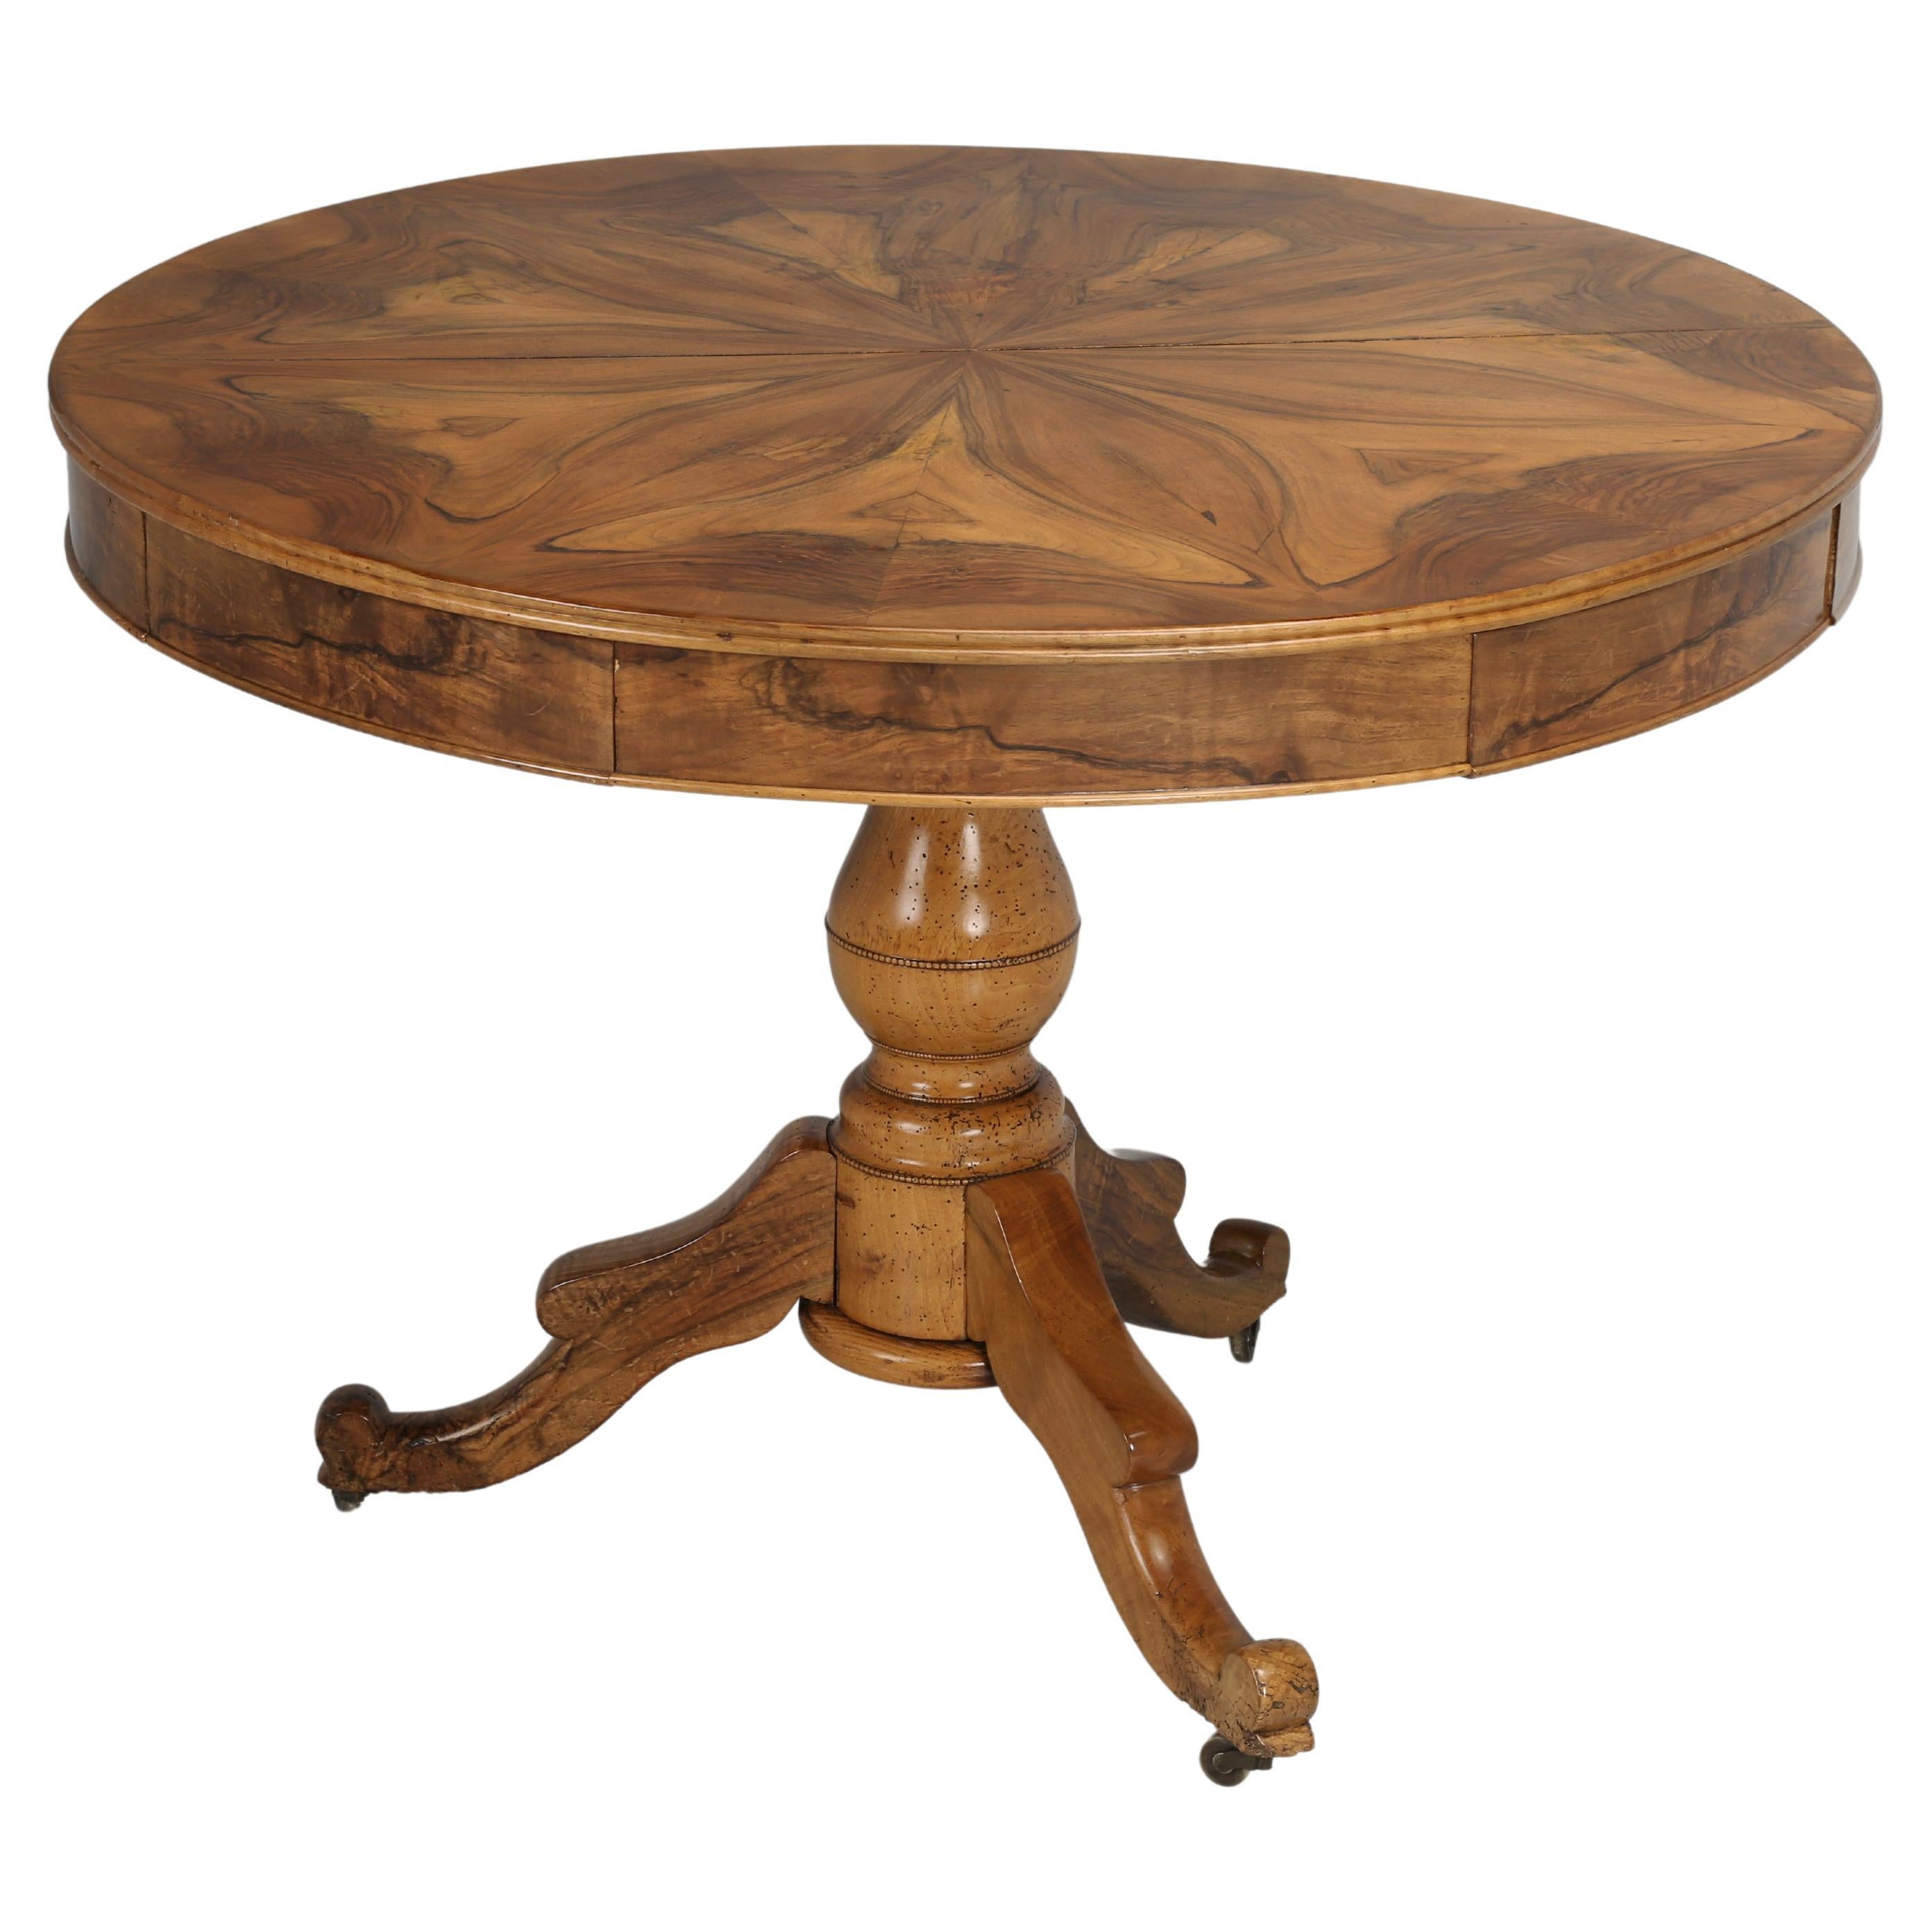 Antique French Center Hall Table in Crotch Walnut with French Polish Finish